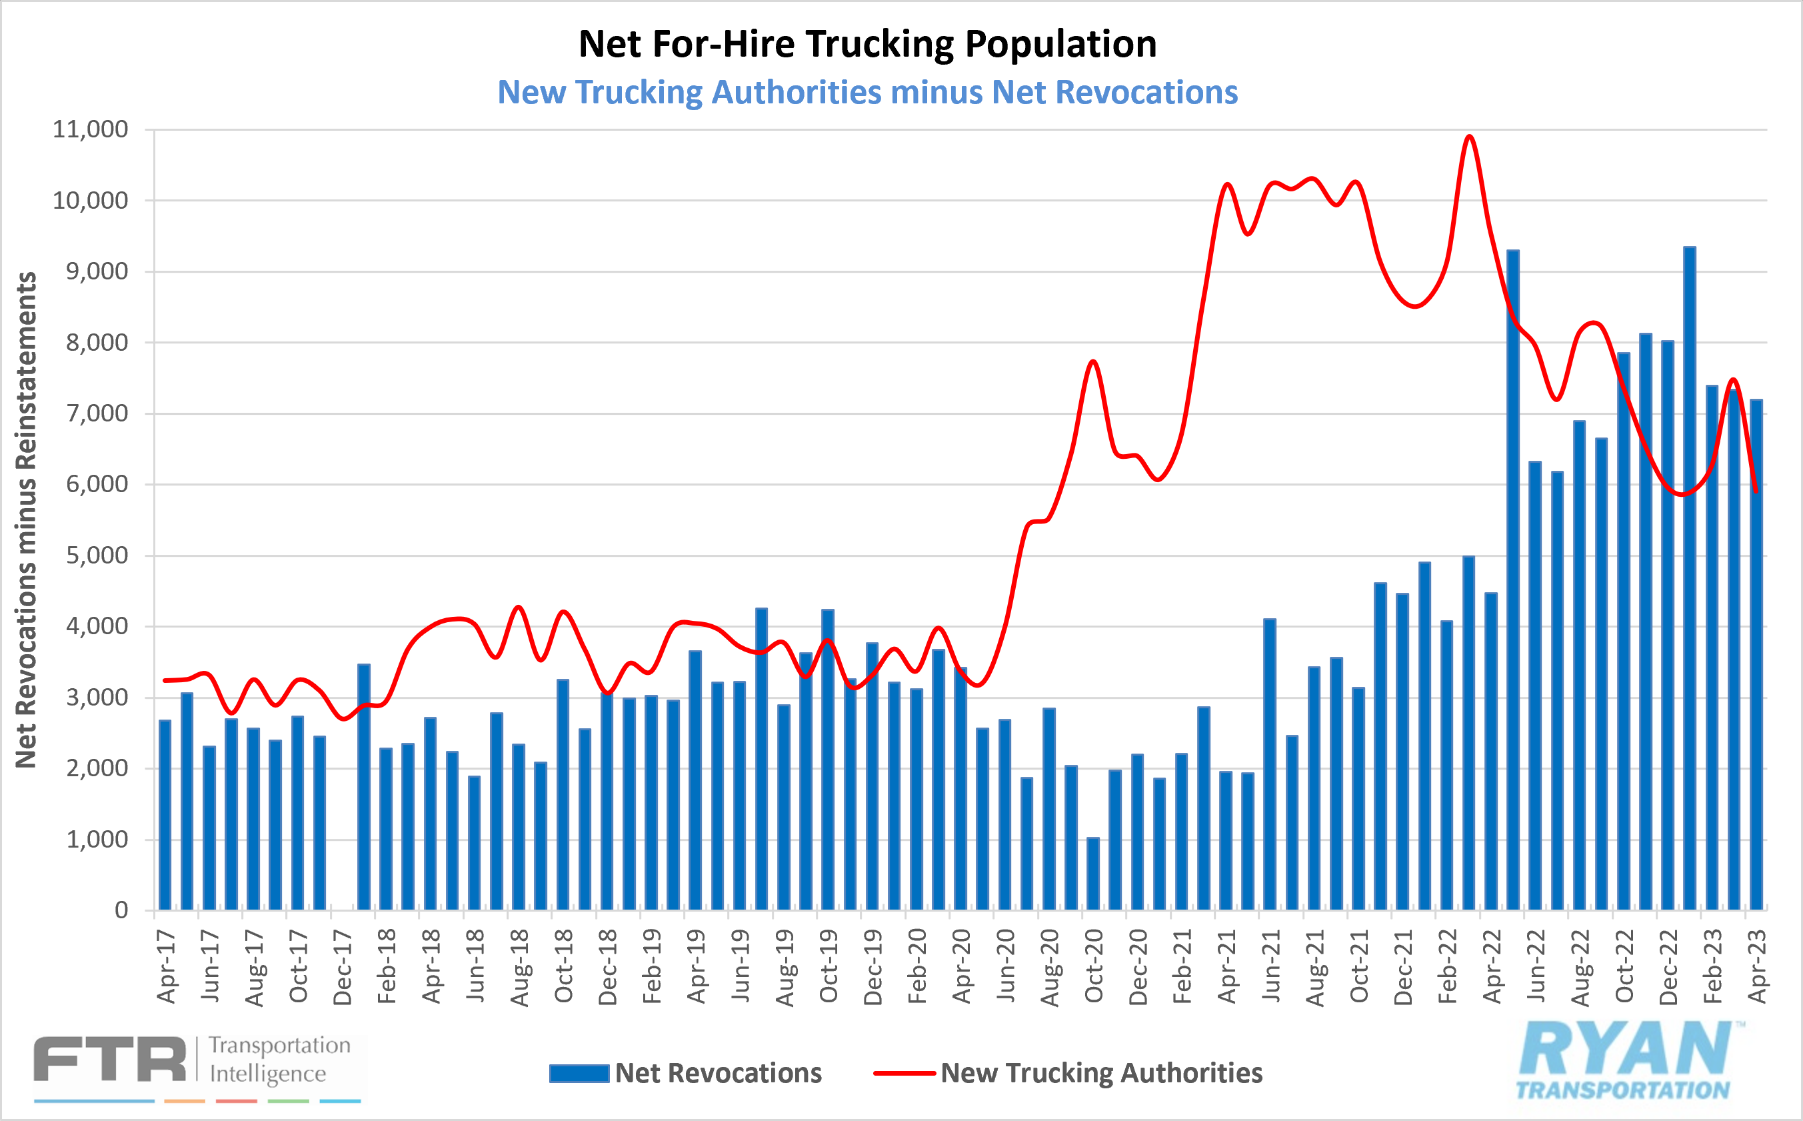 Net For-Hire Trucking Population